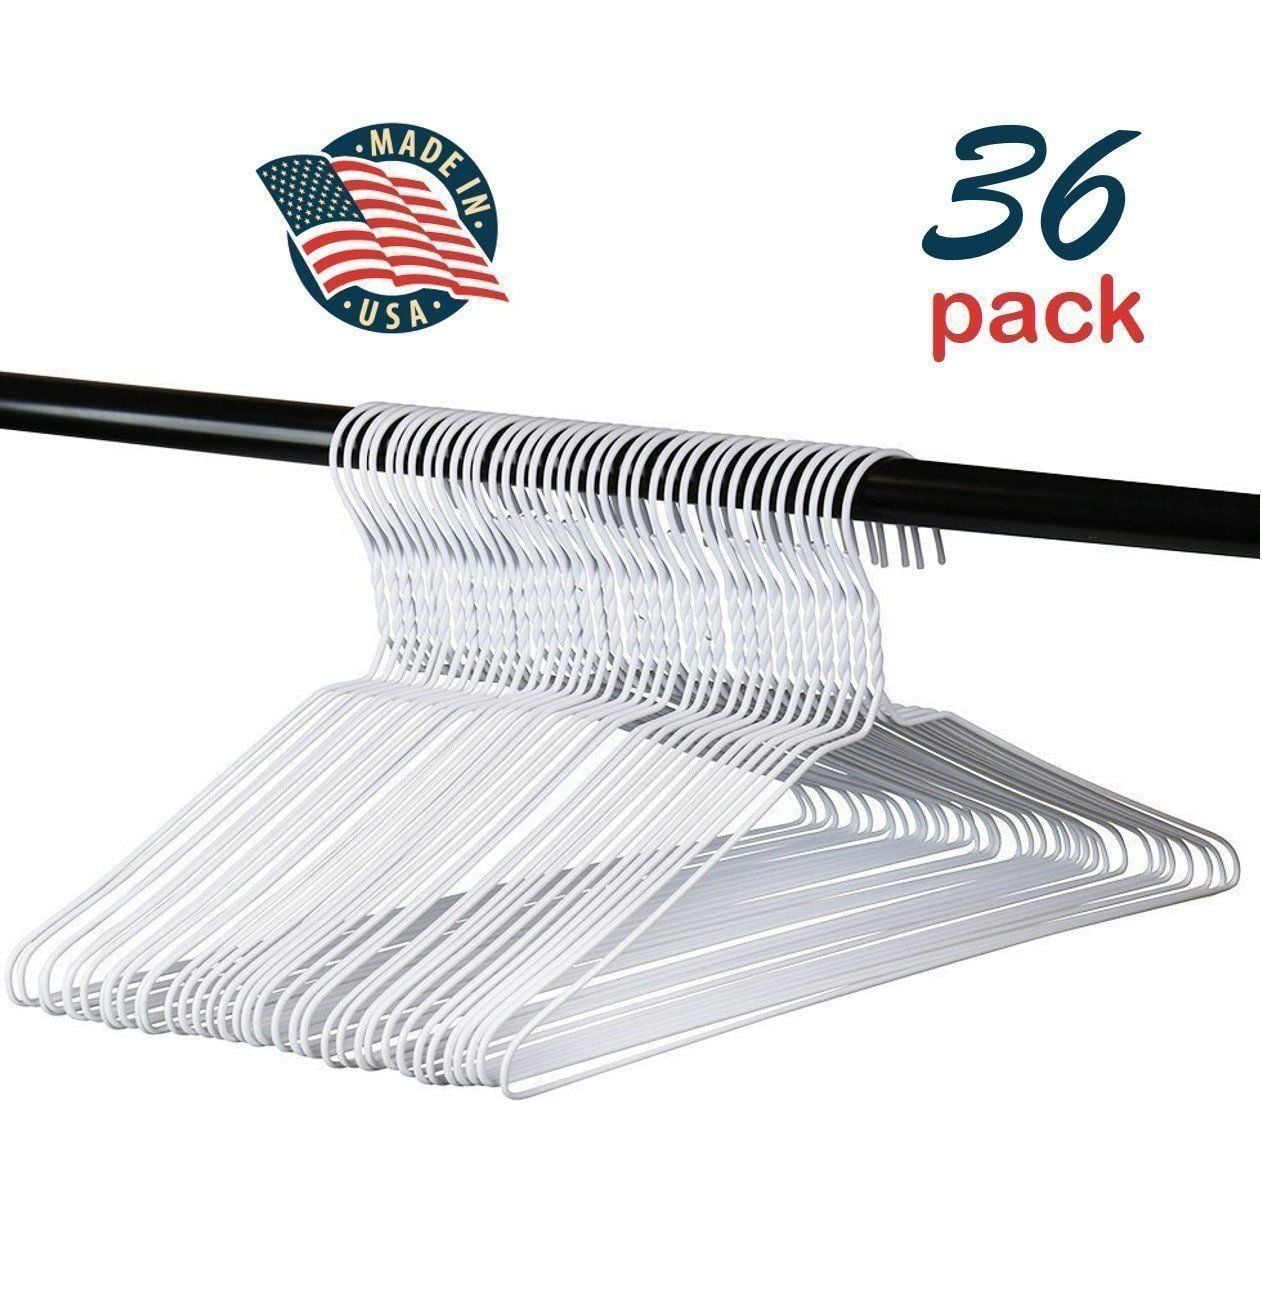 Vinyl Coated Wire Metal Hangers White Standard Adult Size Pack of 36. Made in